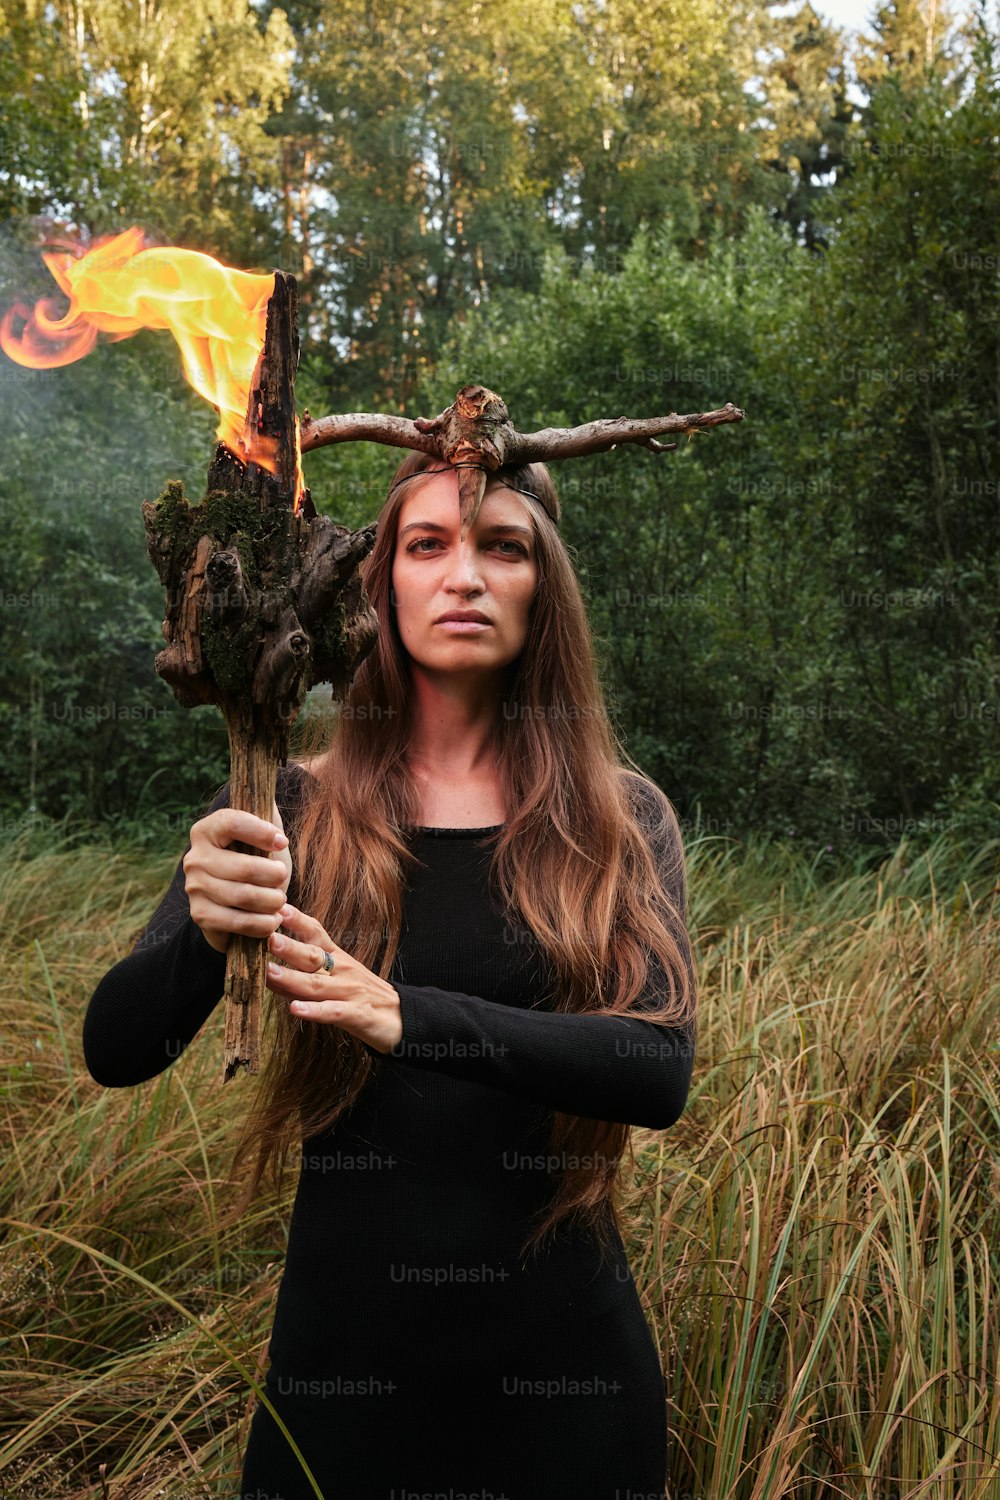 a woman in a black dress holding a stick with flames on it